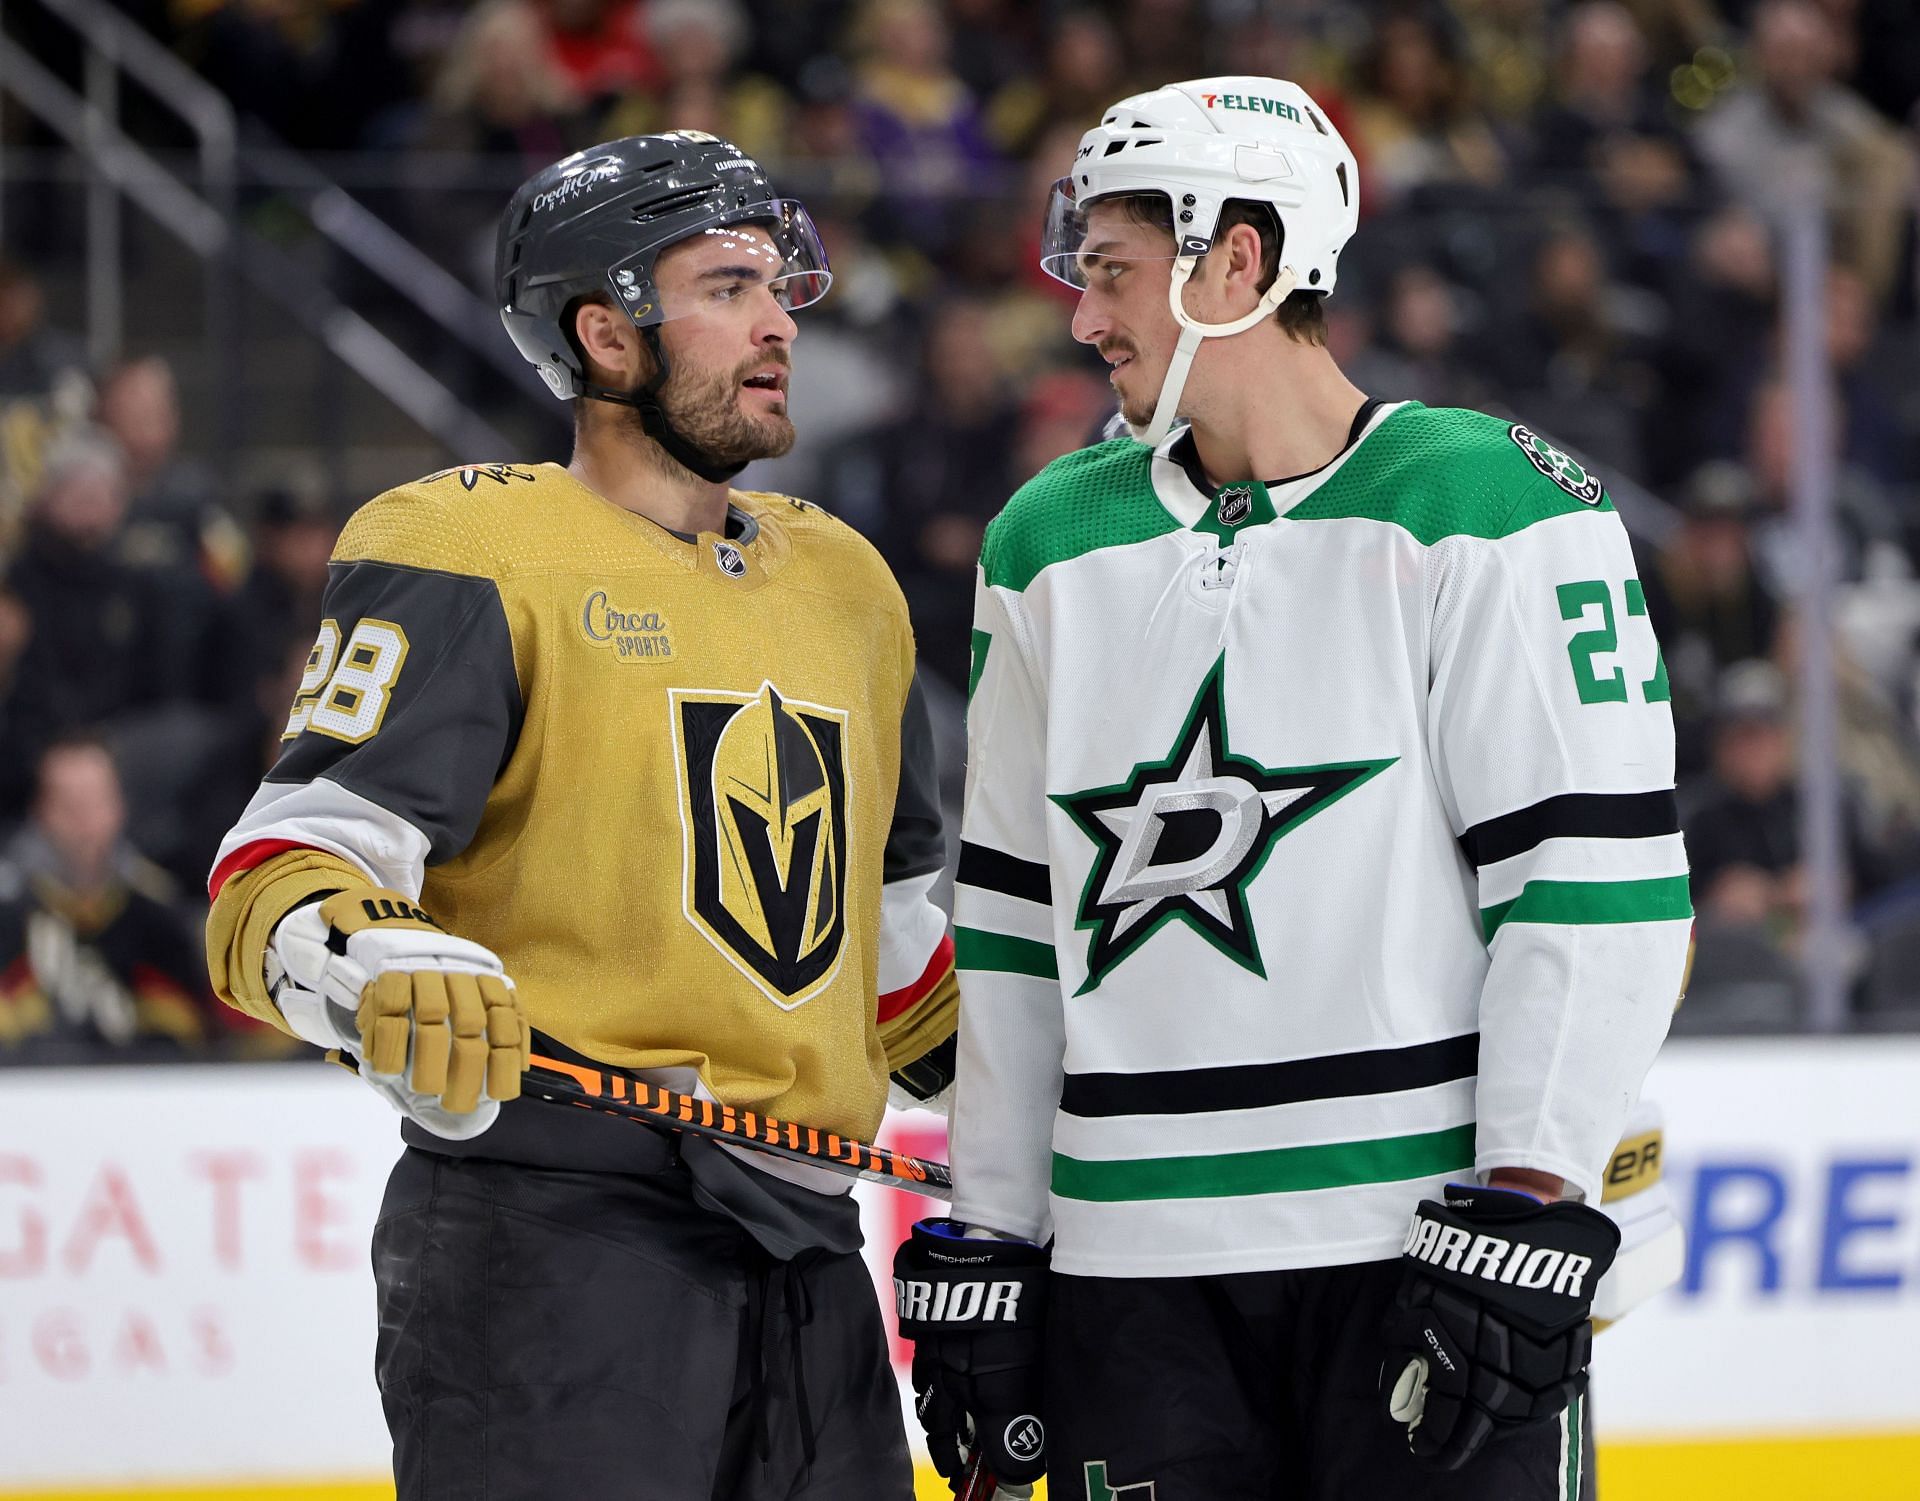 Vegas Golden Knights vs Dallas Stars Game 1 How to watch, TV channel list, live stream details and more